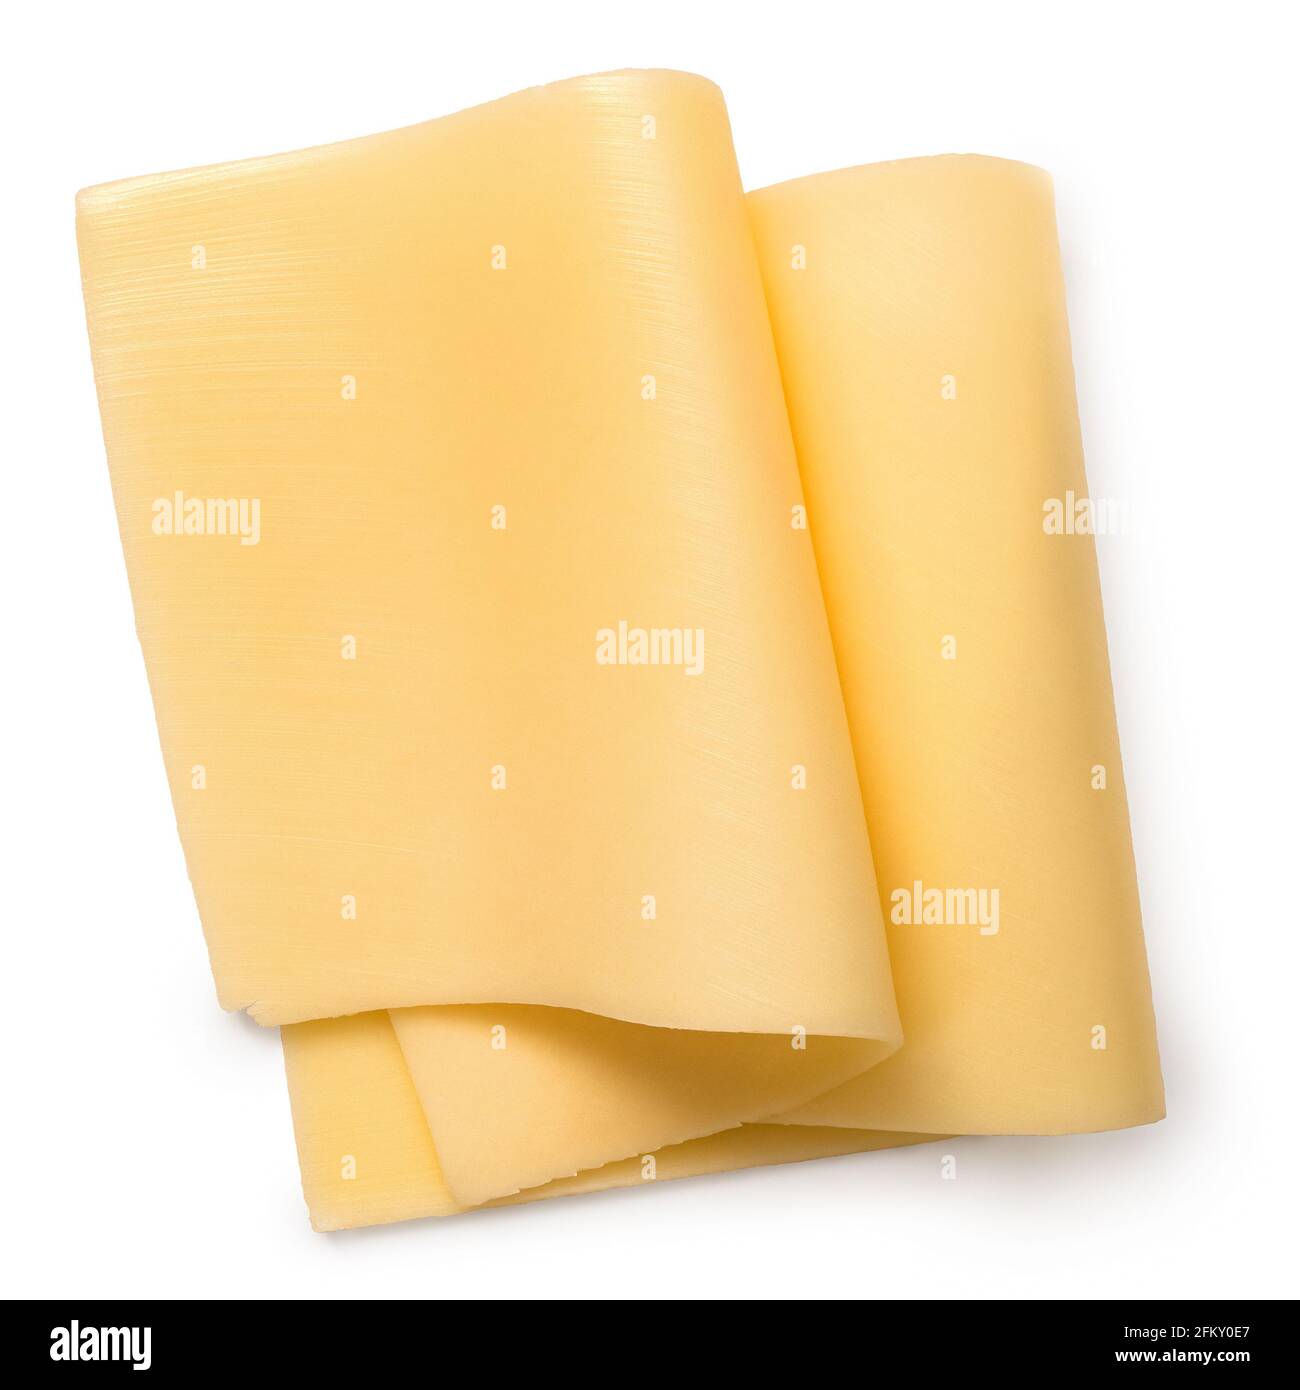 Two folded thin slices of yellow cheese isolated on white. Top view. Stock Photo